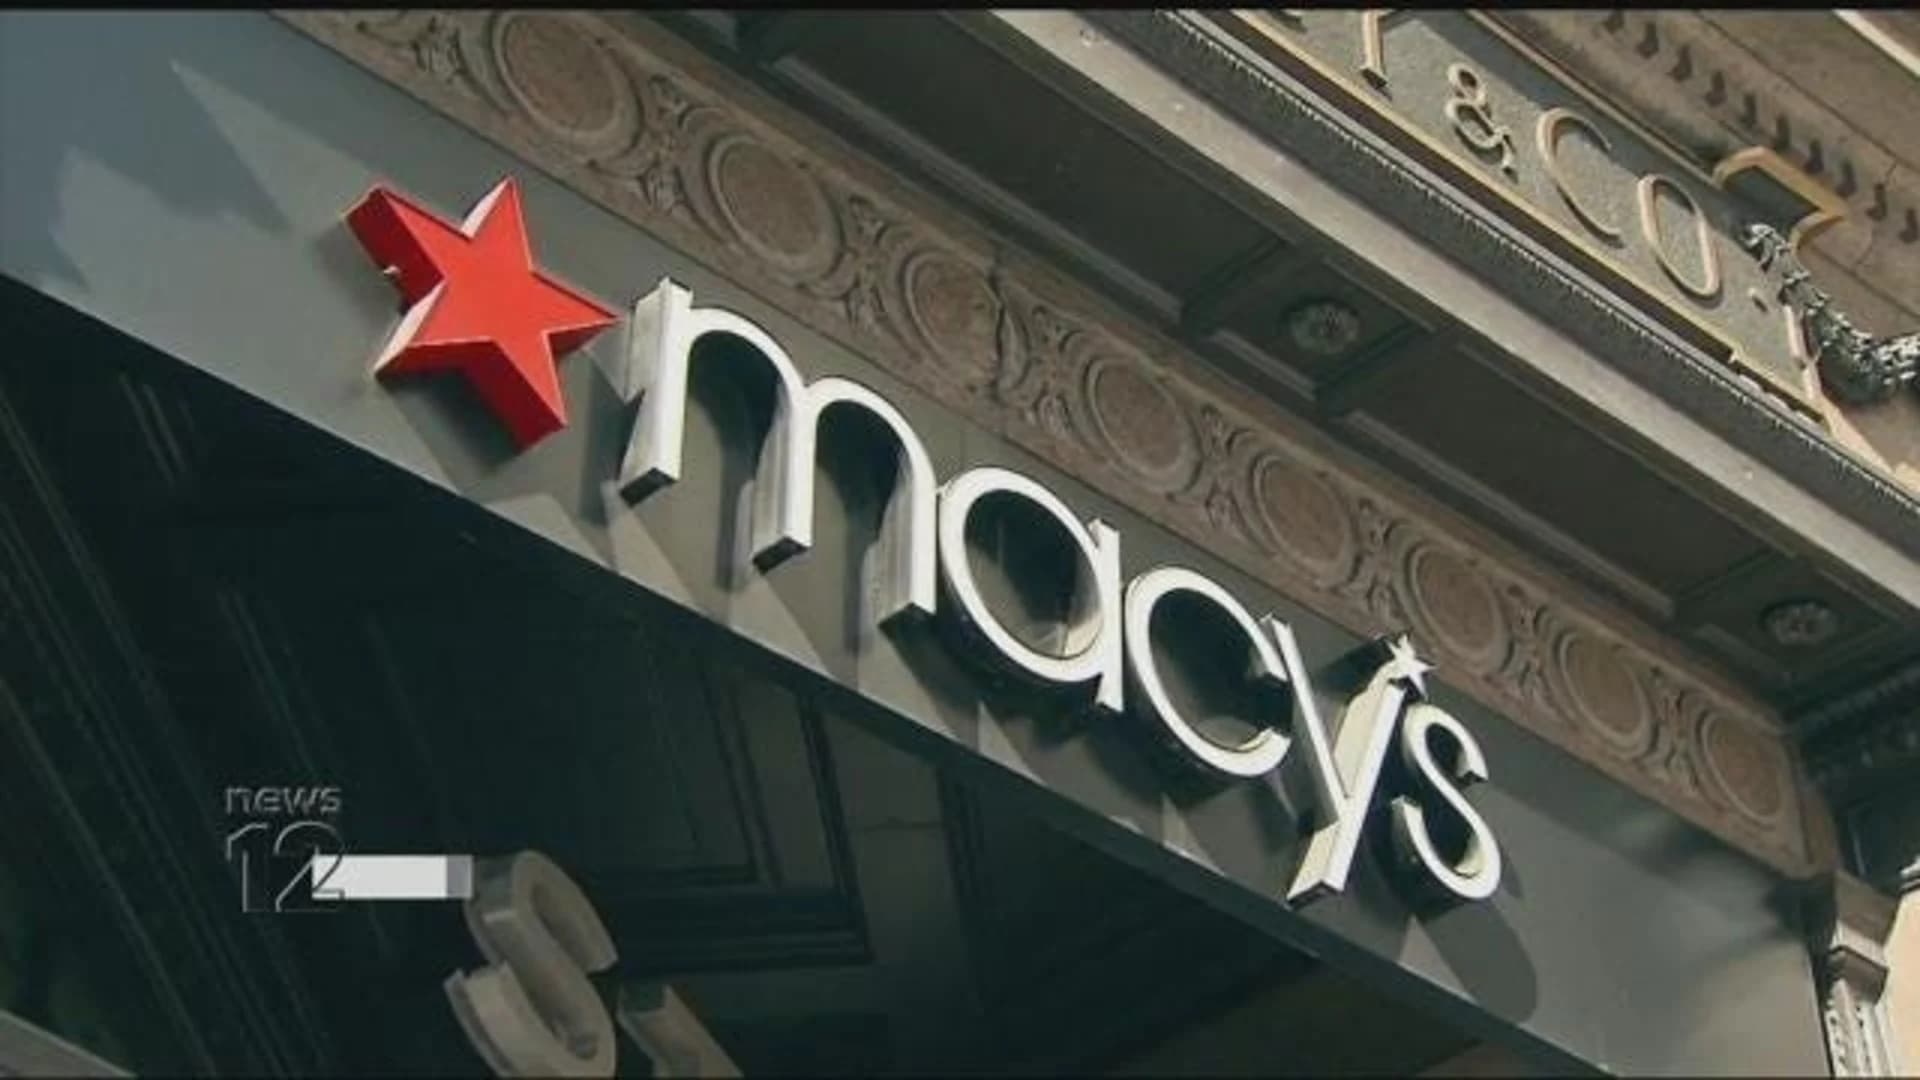 Macy’s says it will close 2 Long Island stores